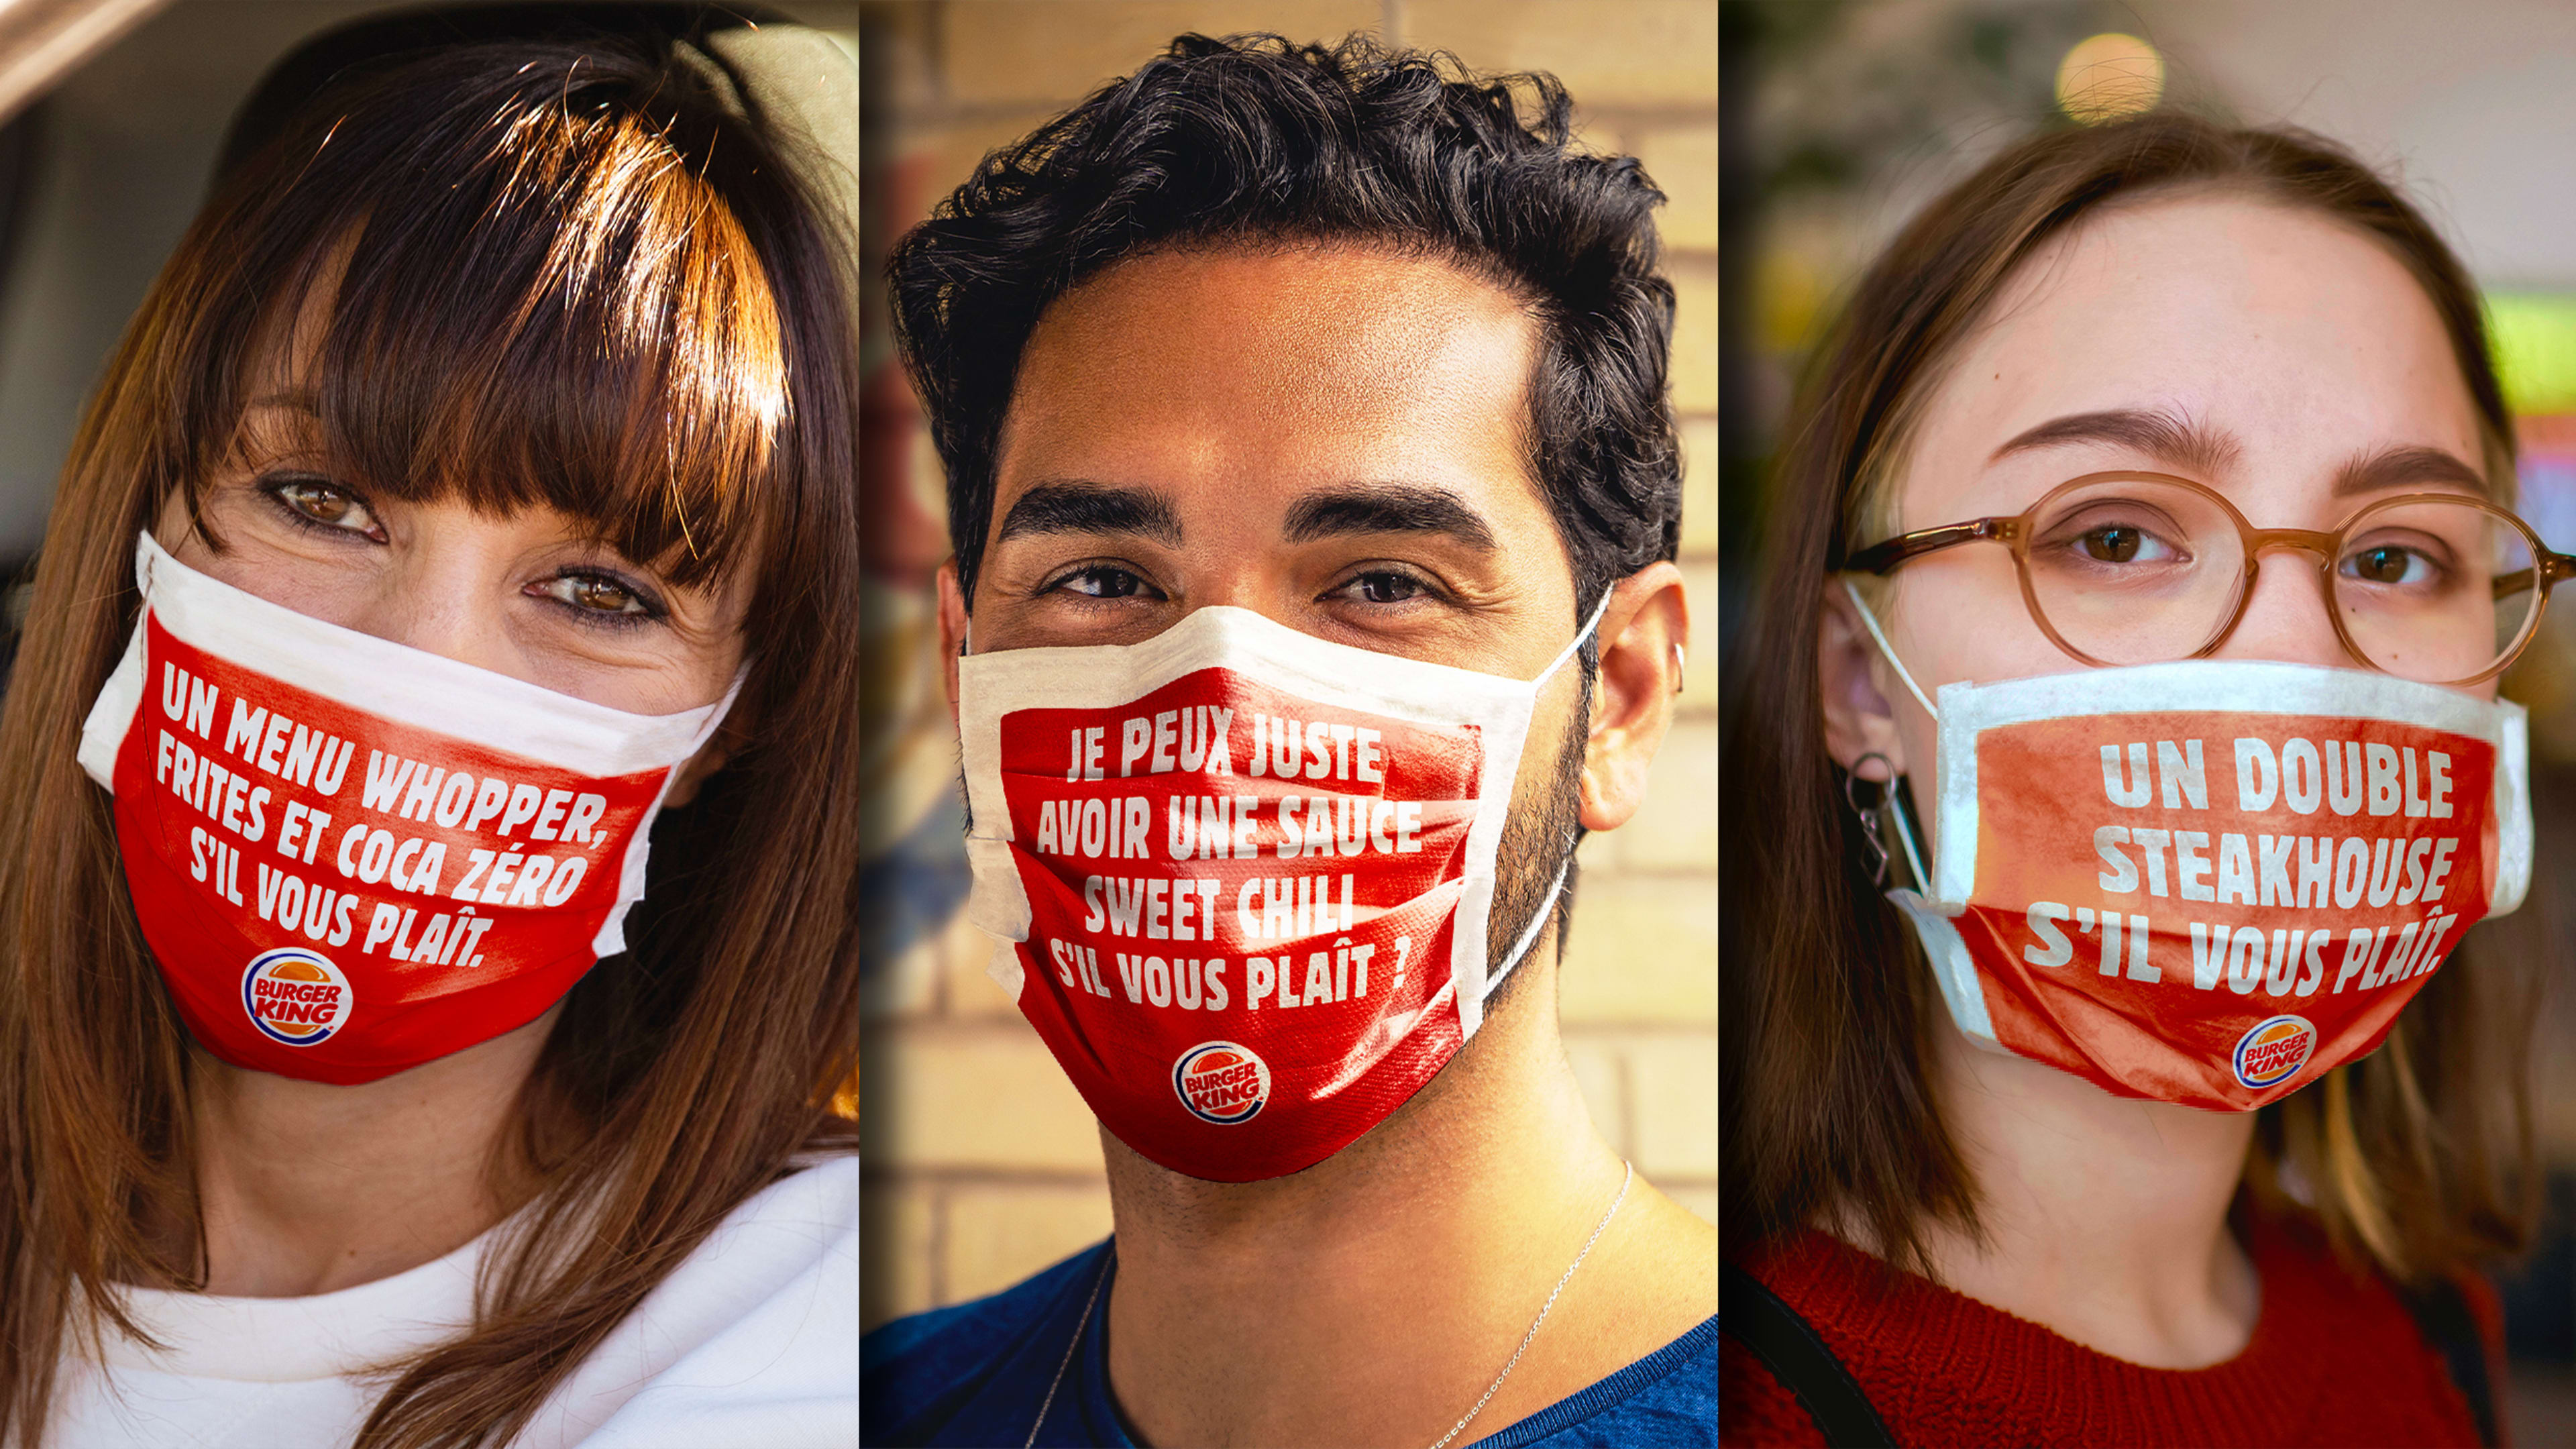 These Burger King-branded masks are even more useful than they seem